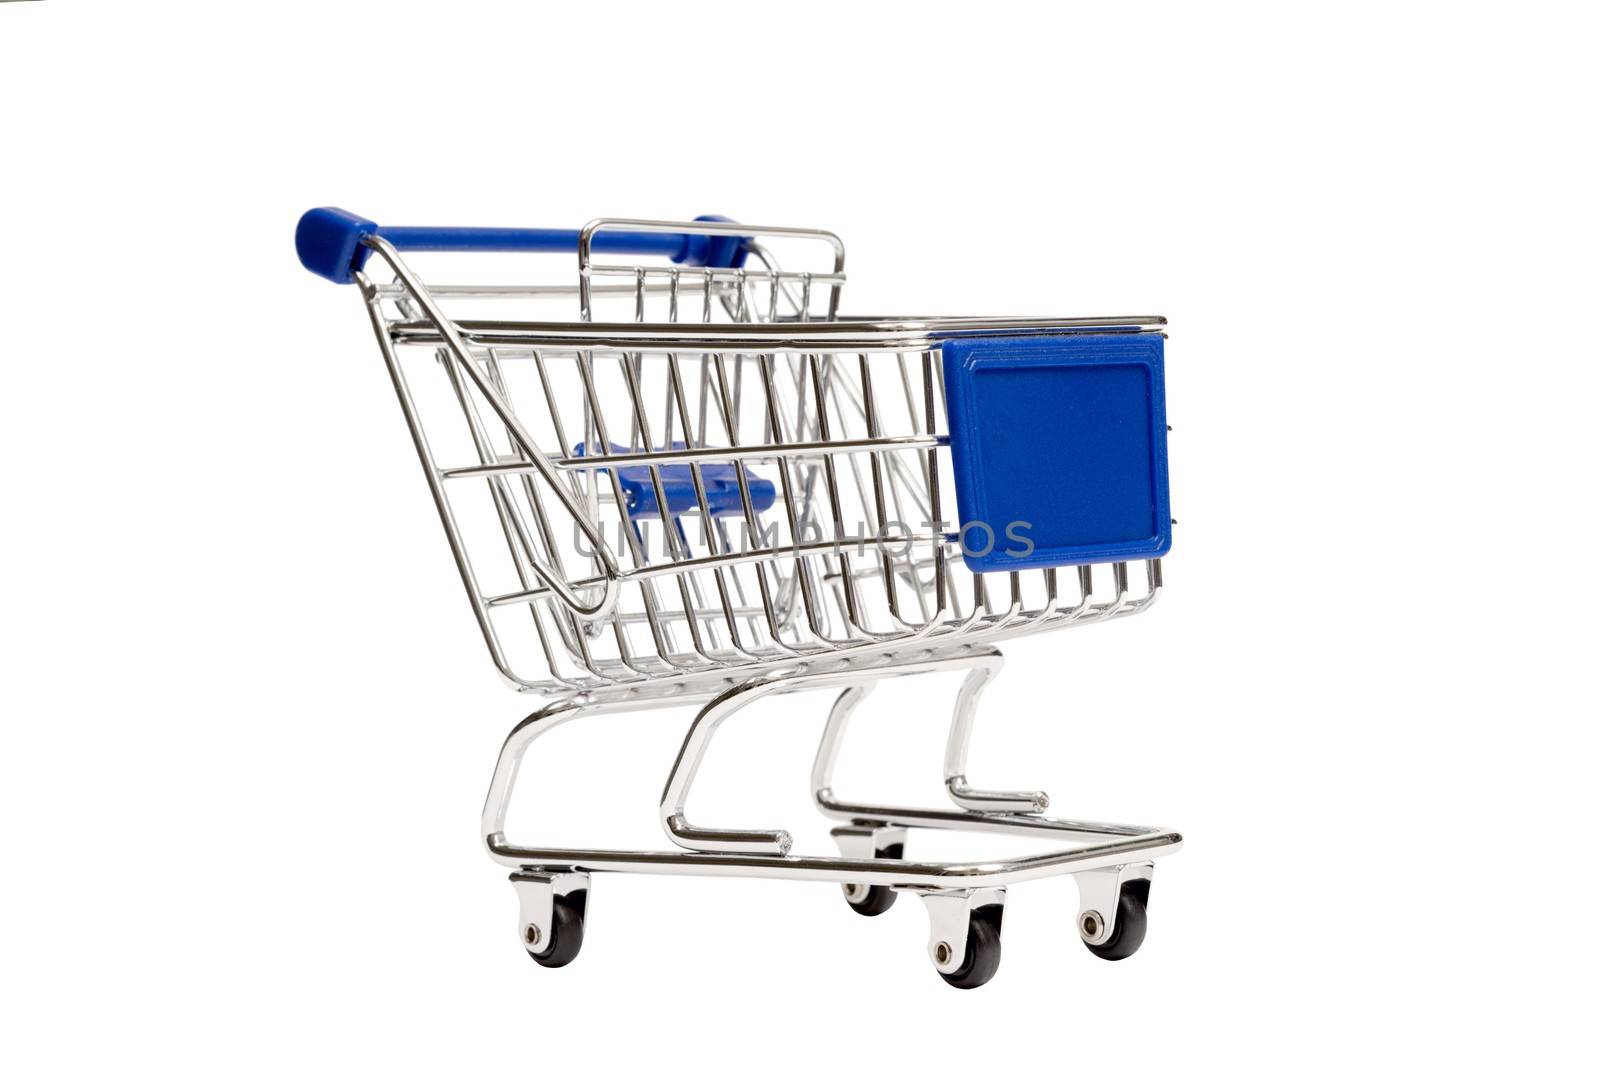 Shopping Cart With Blue Front by stockbuster1